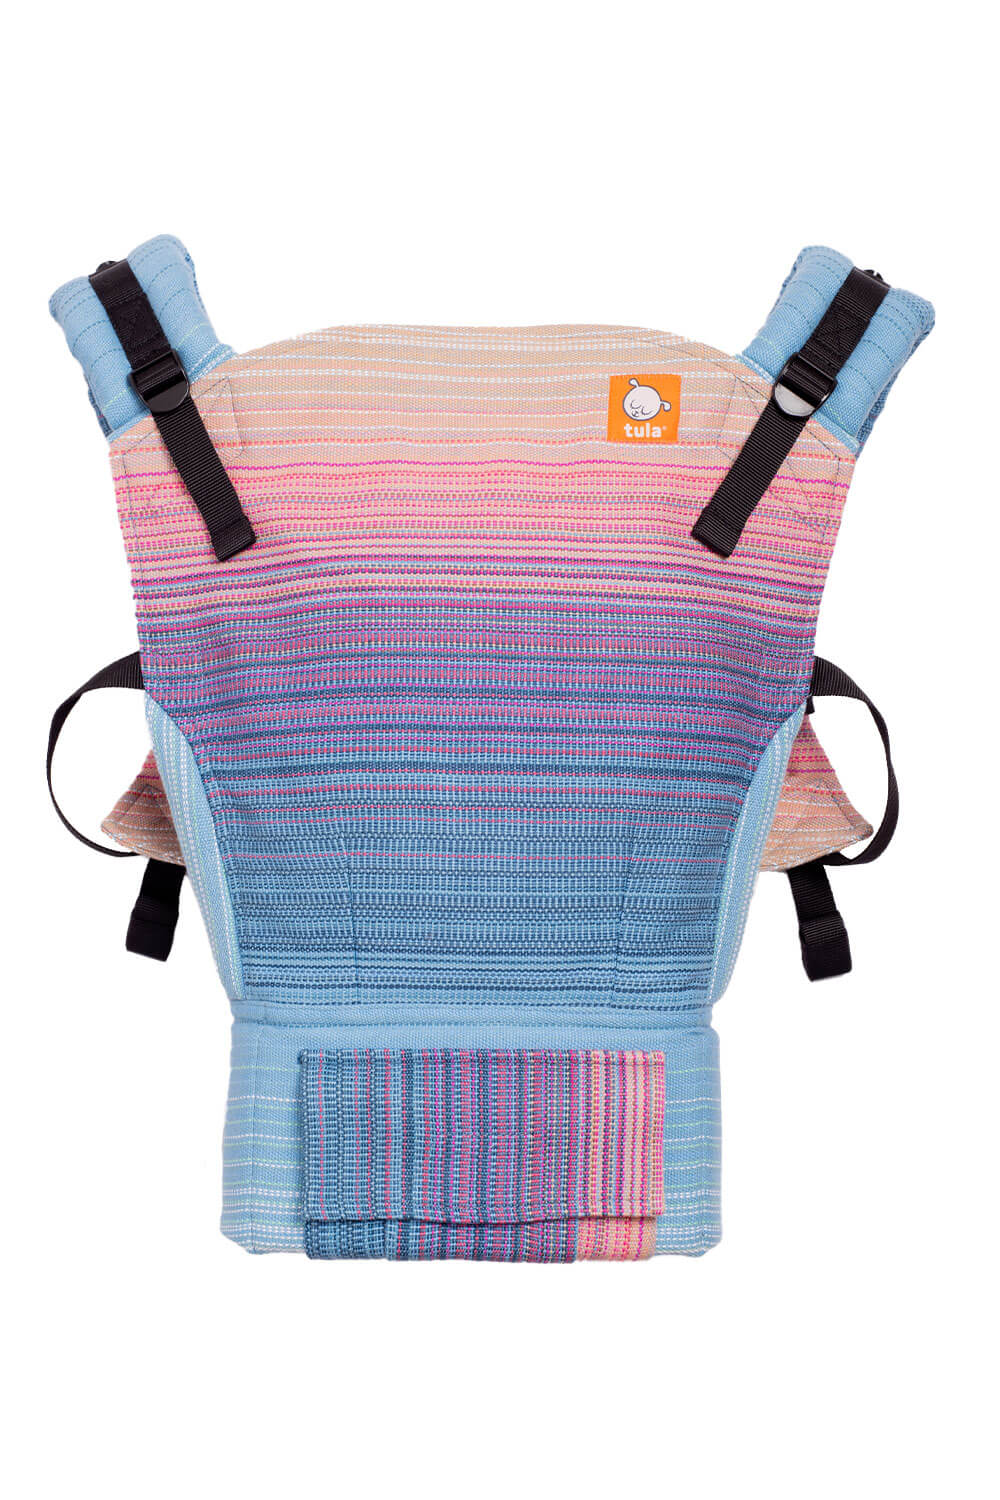 Capeside - Signature Handwoven Standard Baby Carrier